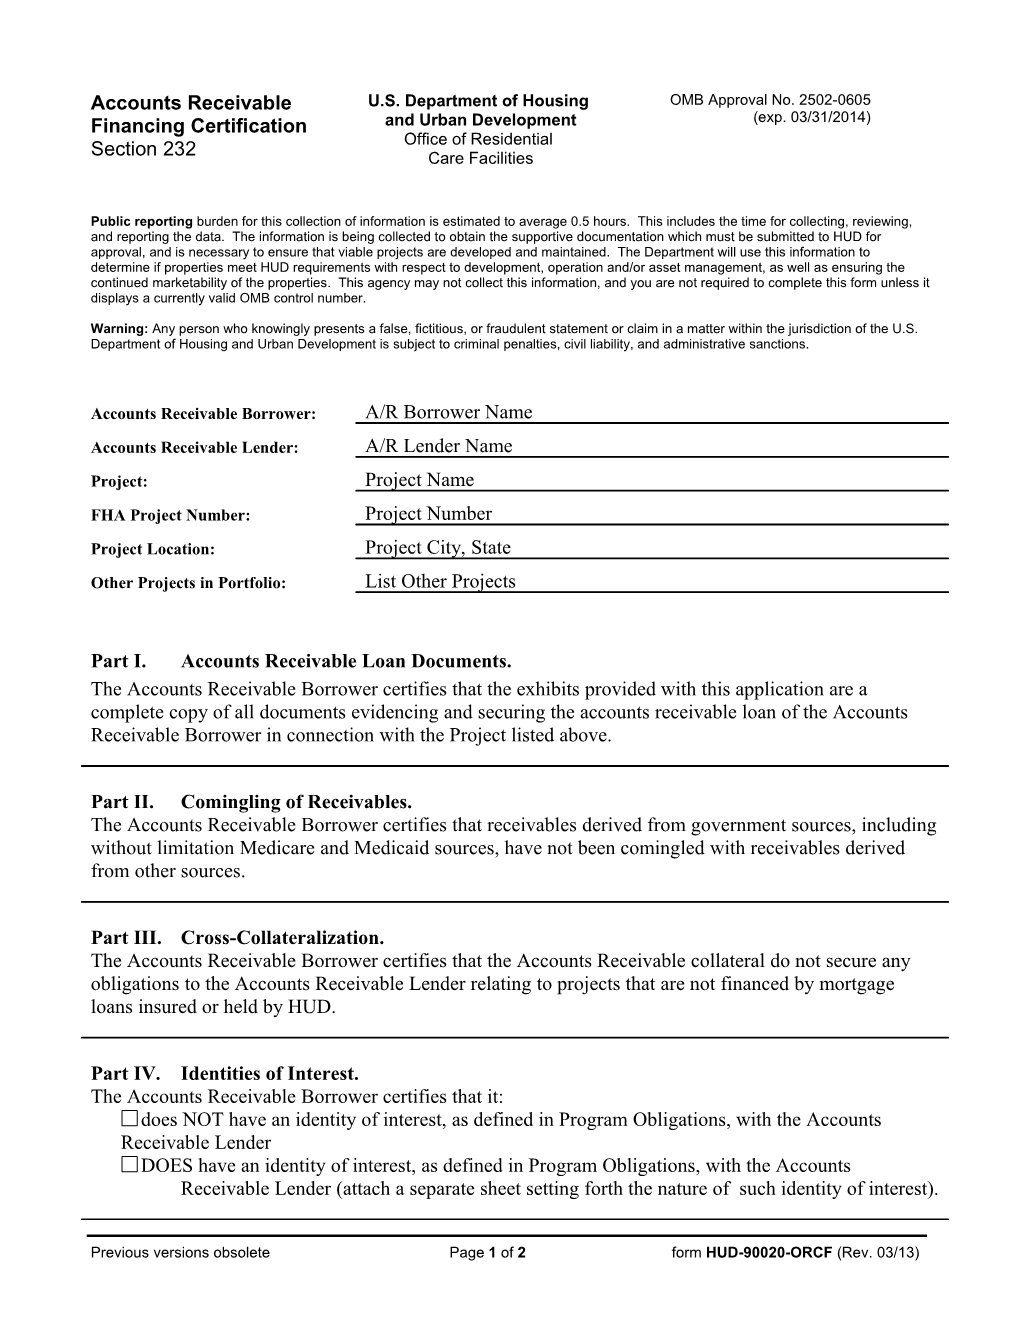 Previous Versions Obsolete Page 1 of 2 Form HUD-90020-ORCF (Rev. 03/13)